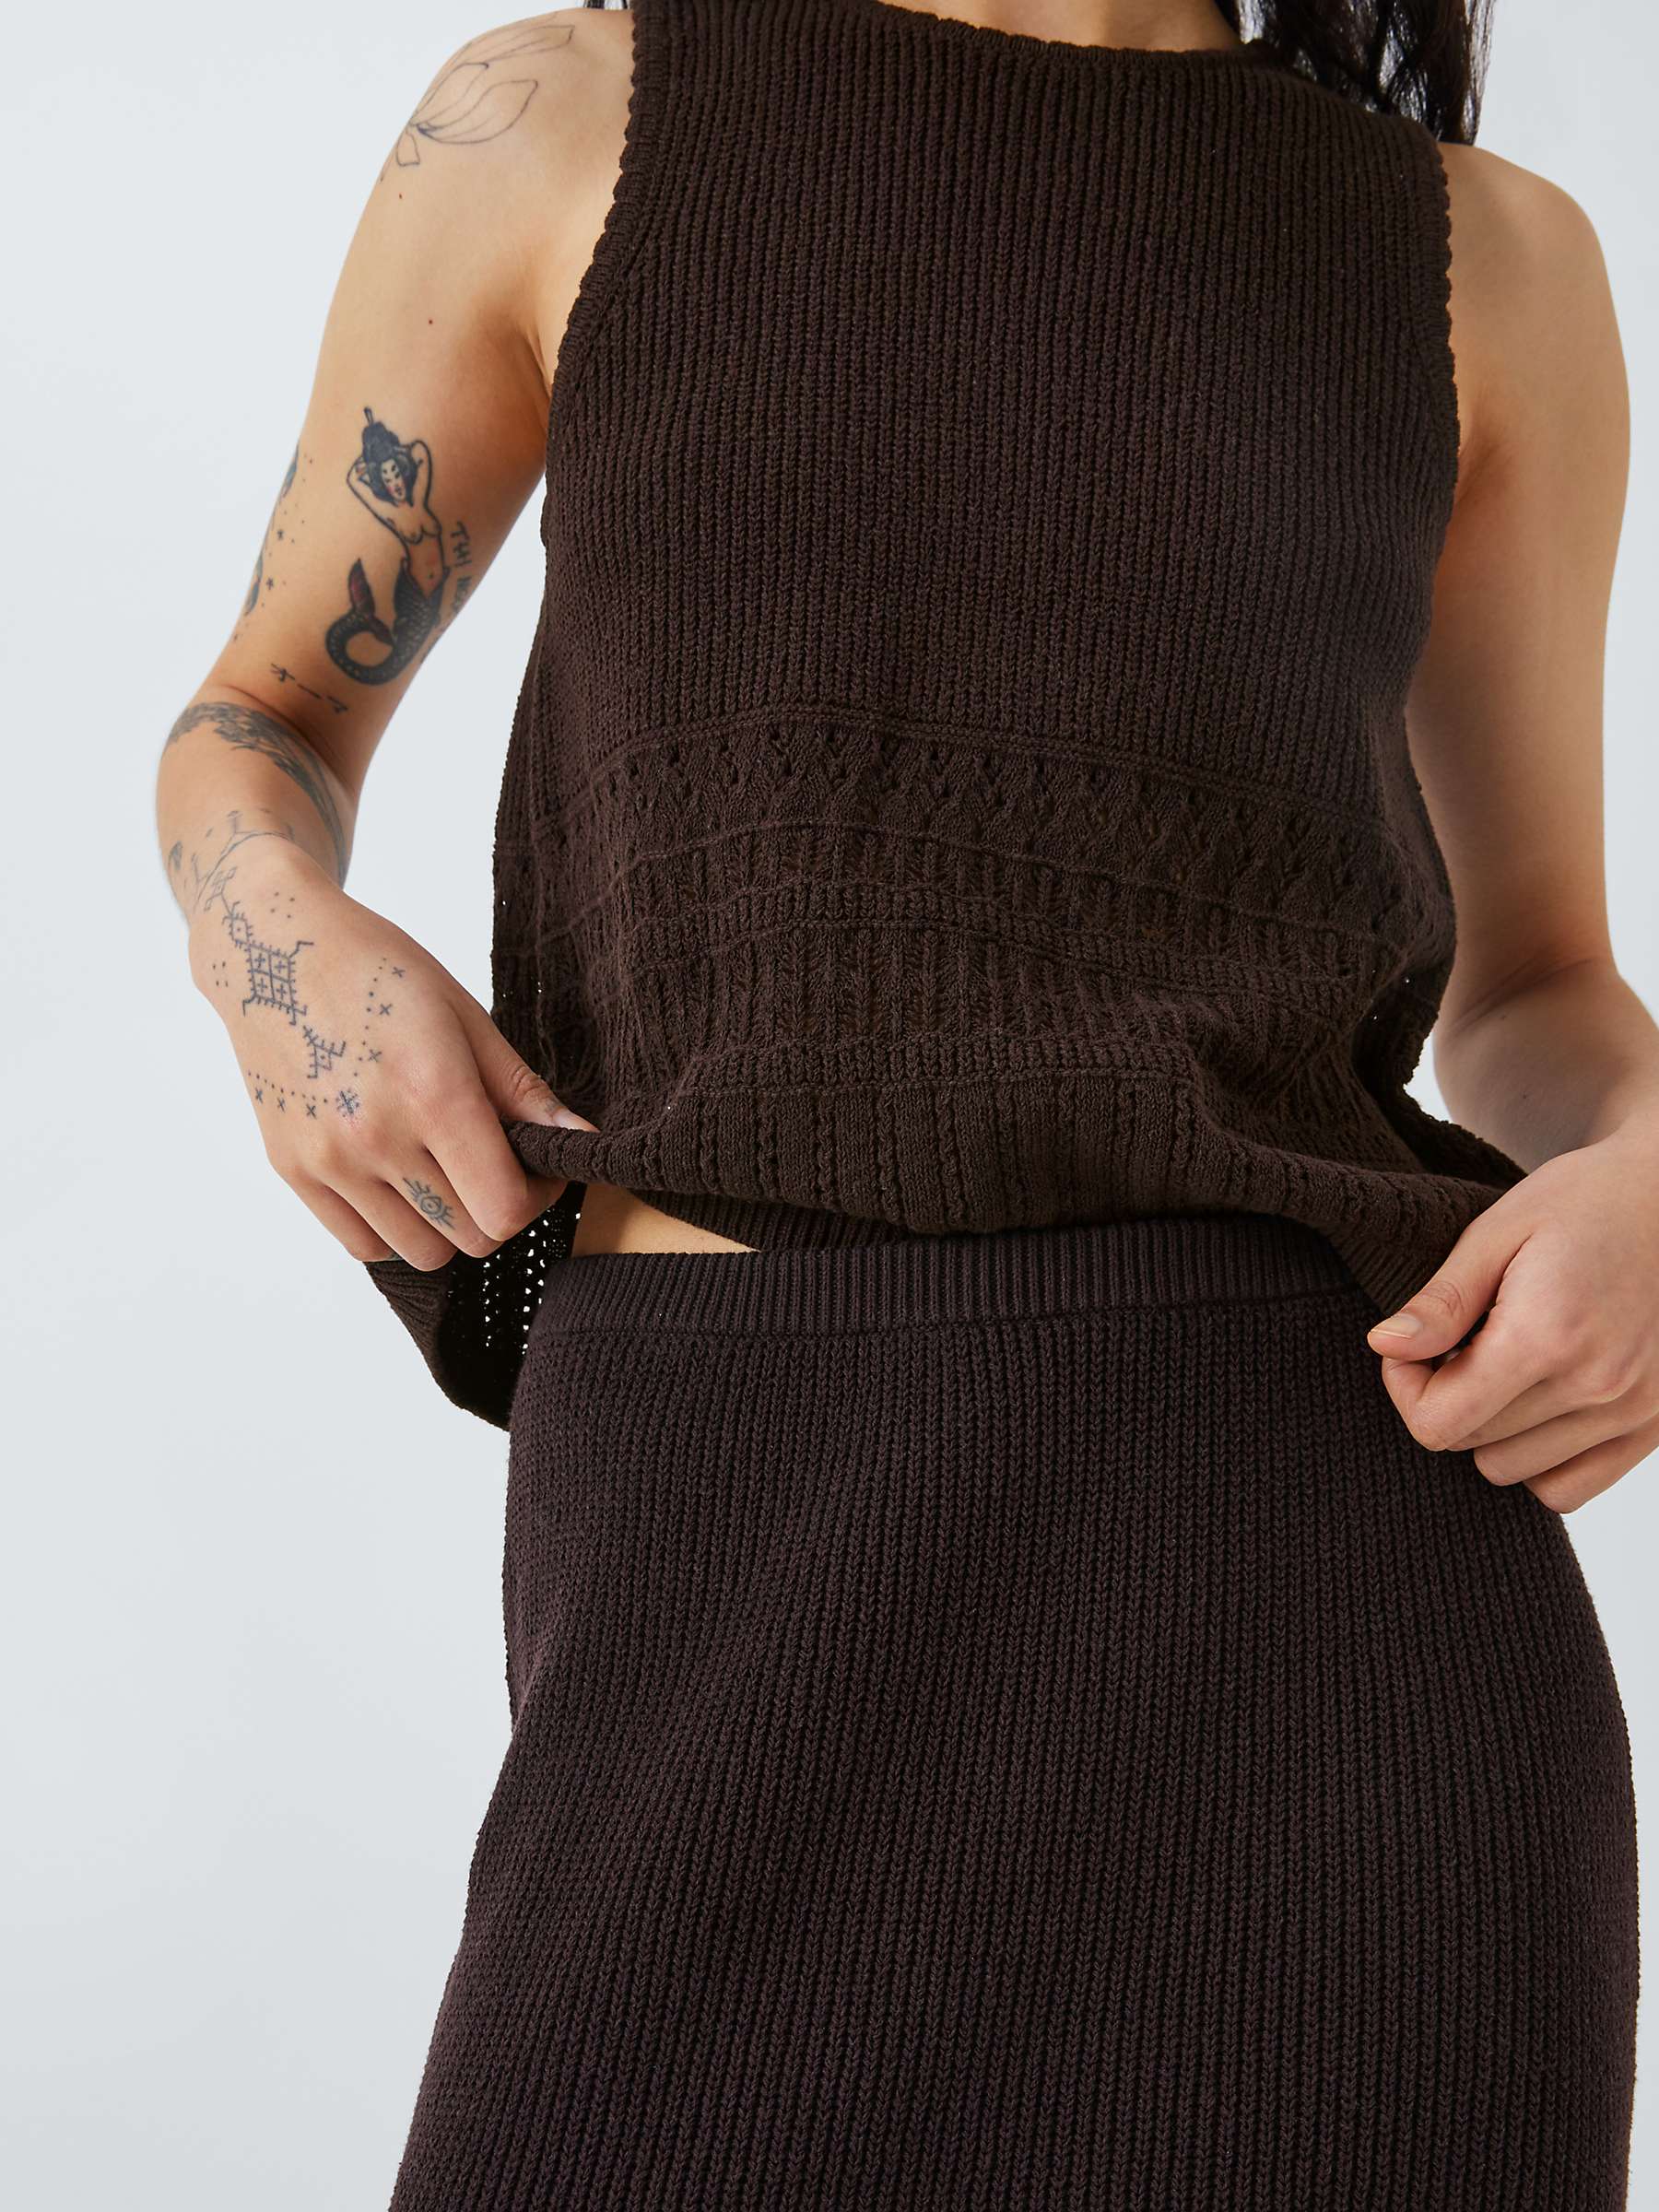 Buy AND/OR Lilly Knit Vest Top, Dark Chocolate Online at johnlewis.com